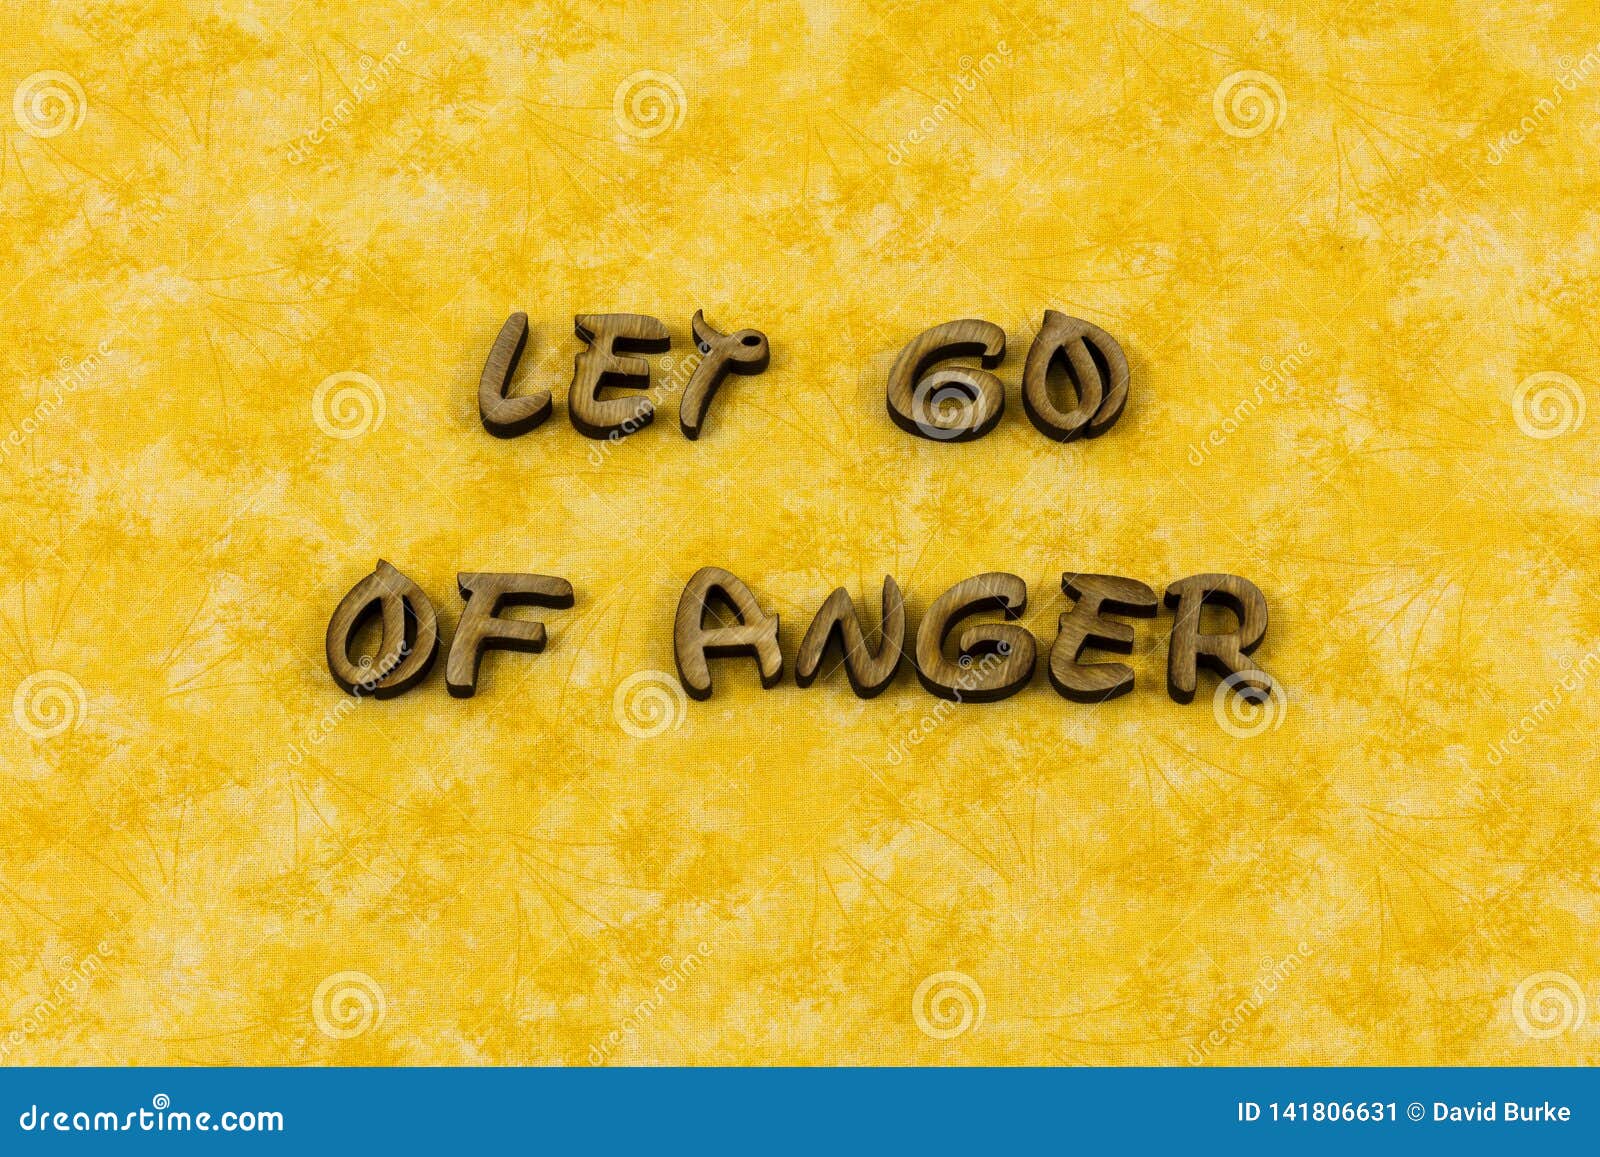 anger management emotion control angry anxiety depression expression